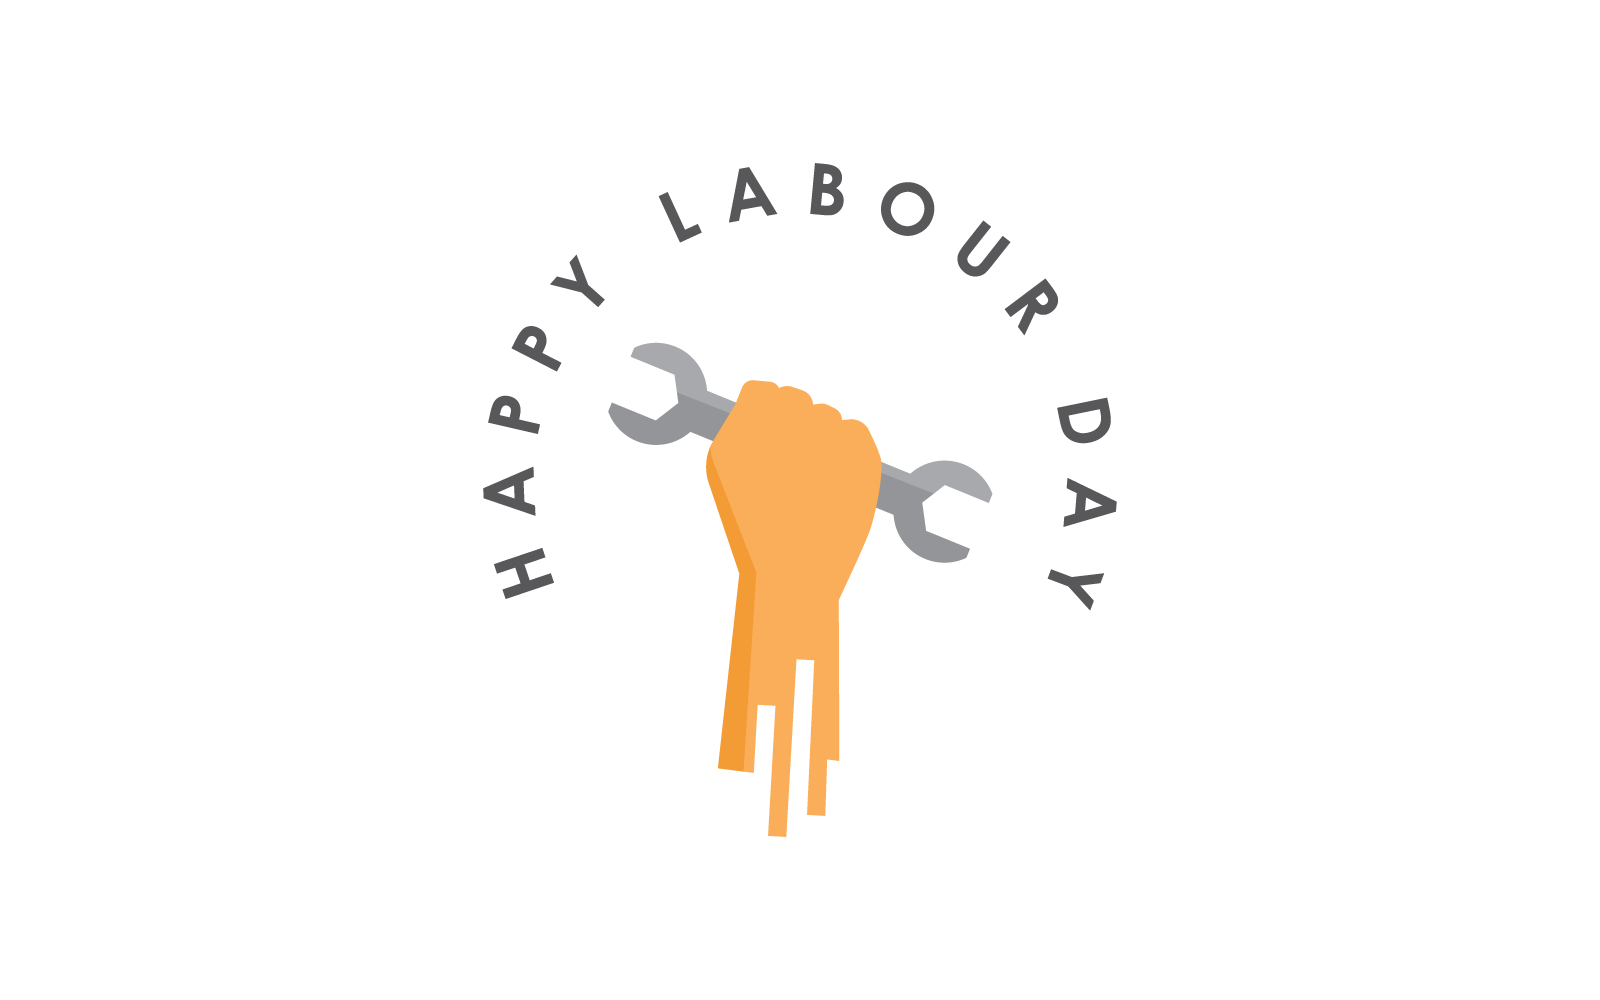 Happy labour day 1 may symbol and logo flat design